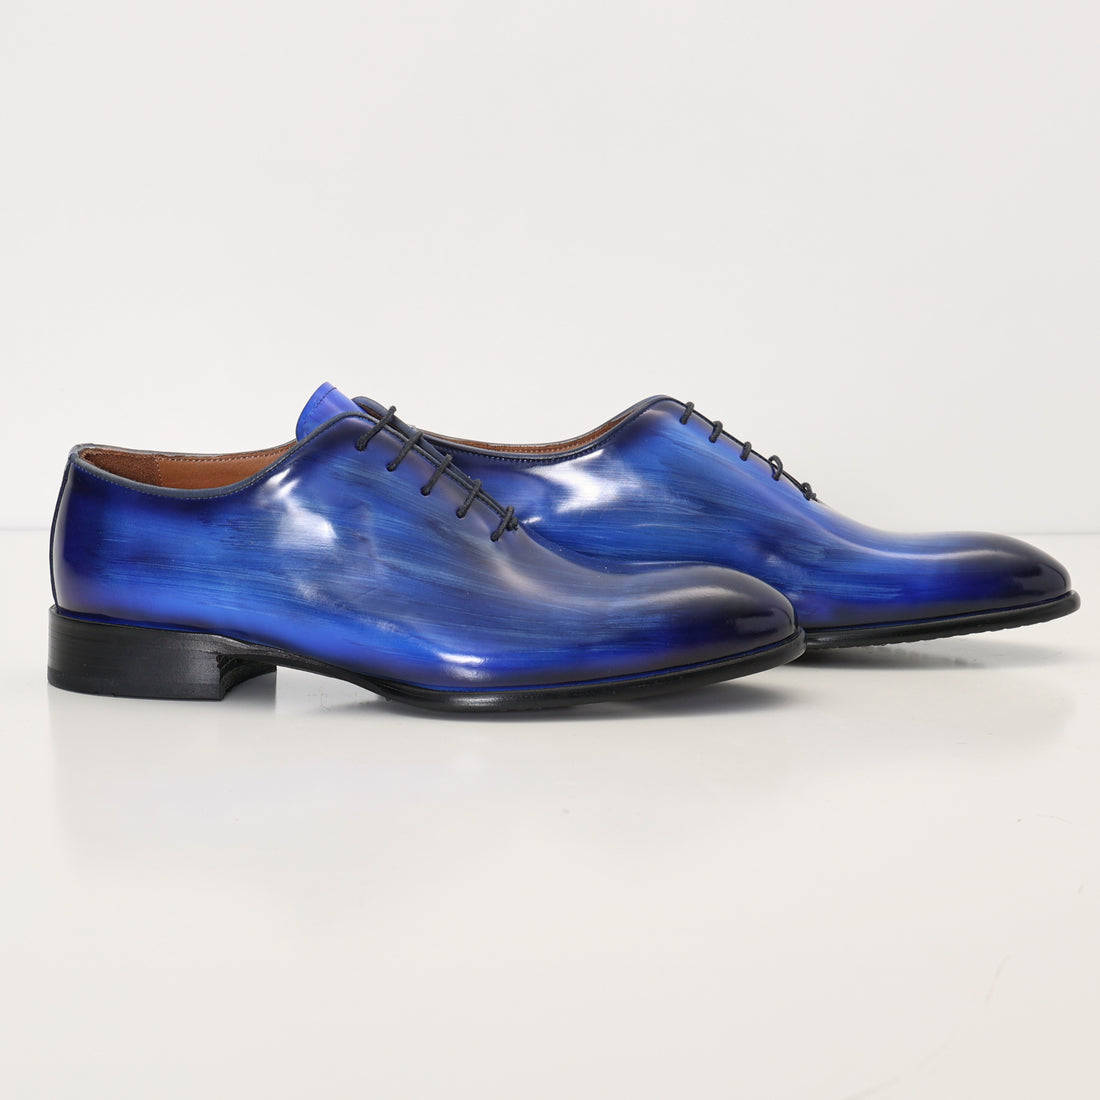 N° AC04 hand paint patina PATENT LEATHER OXFORDS - BLUE